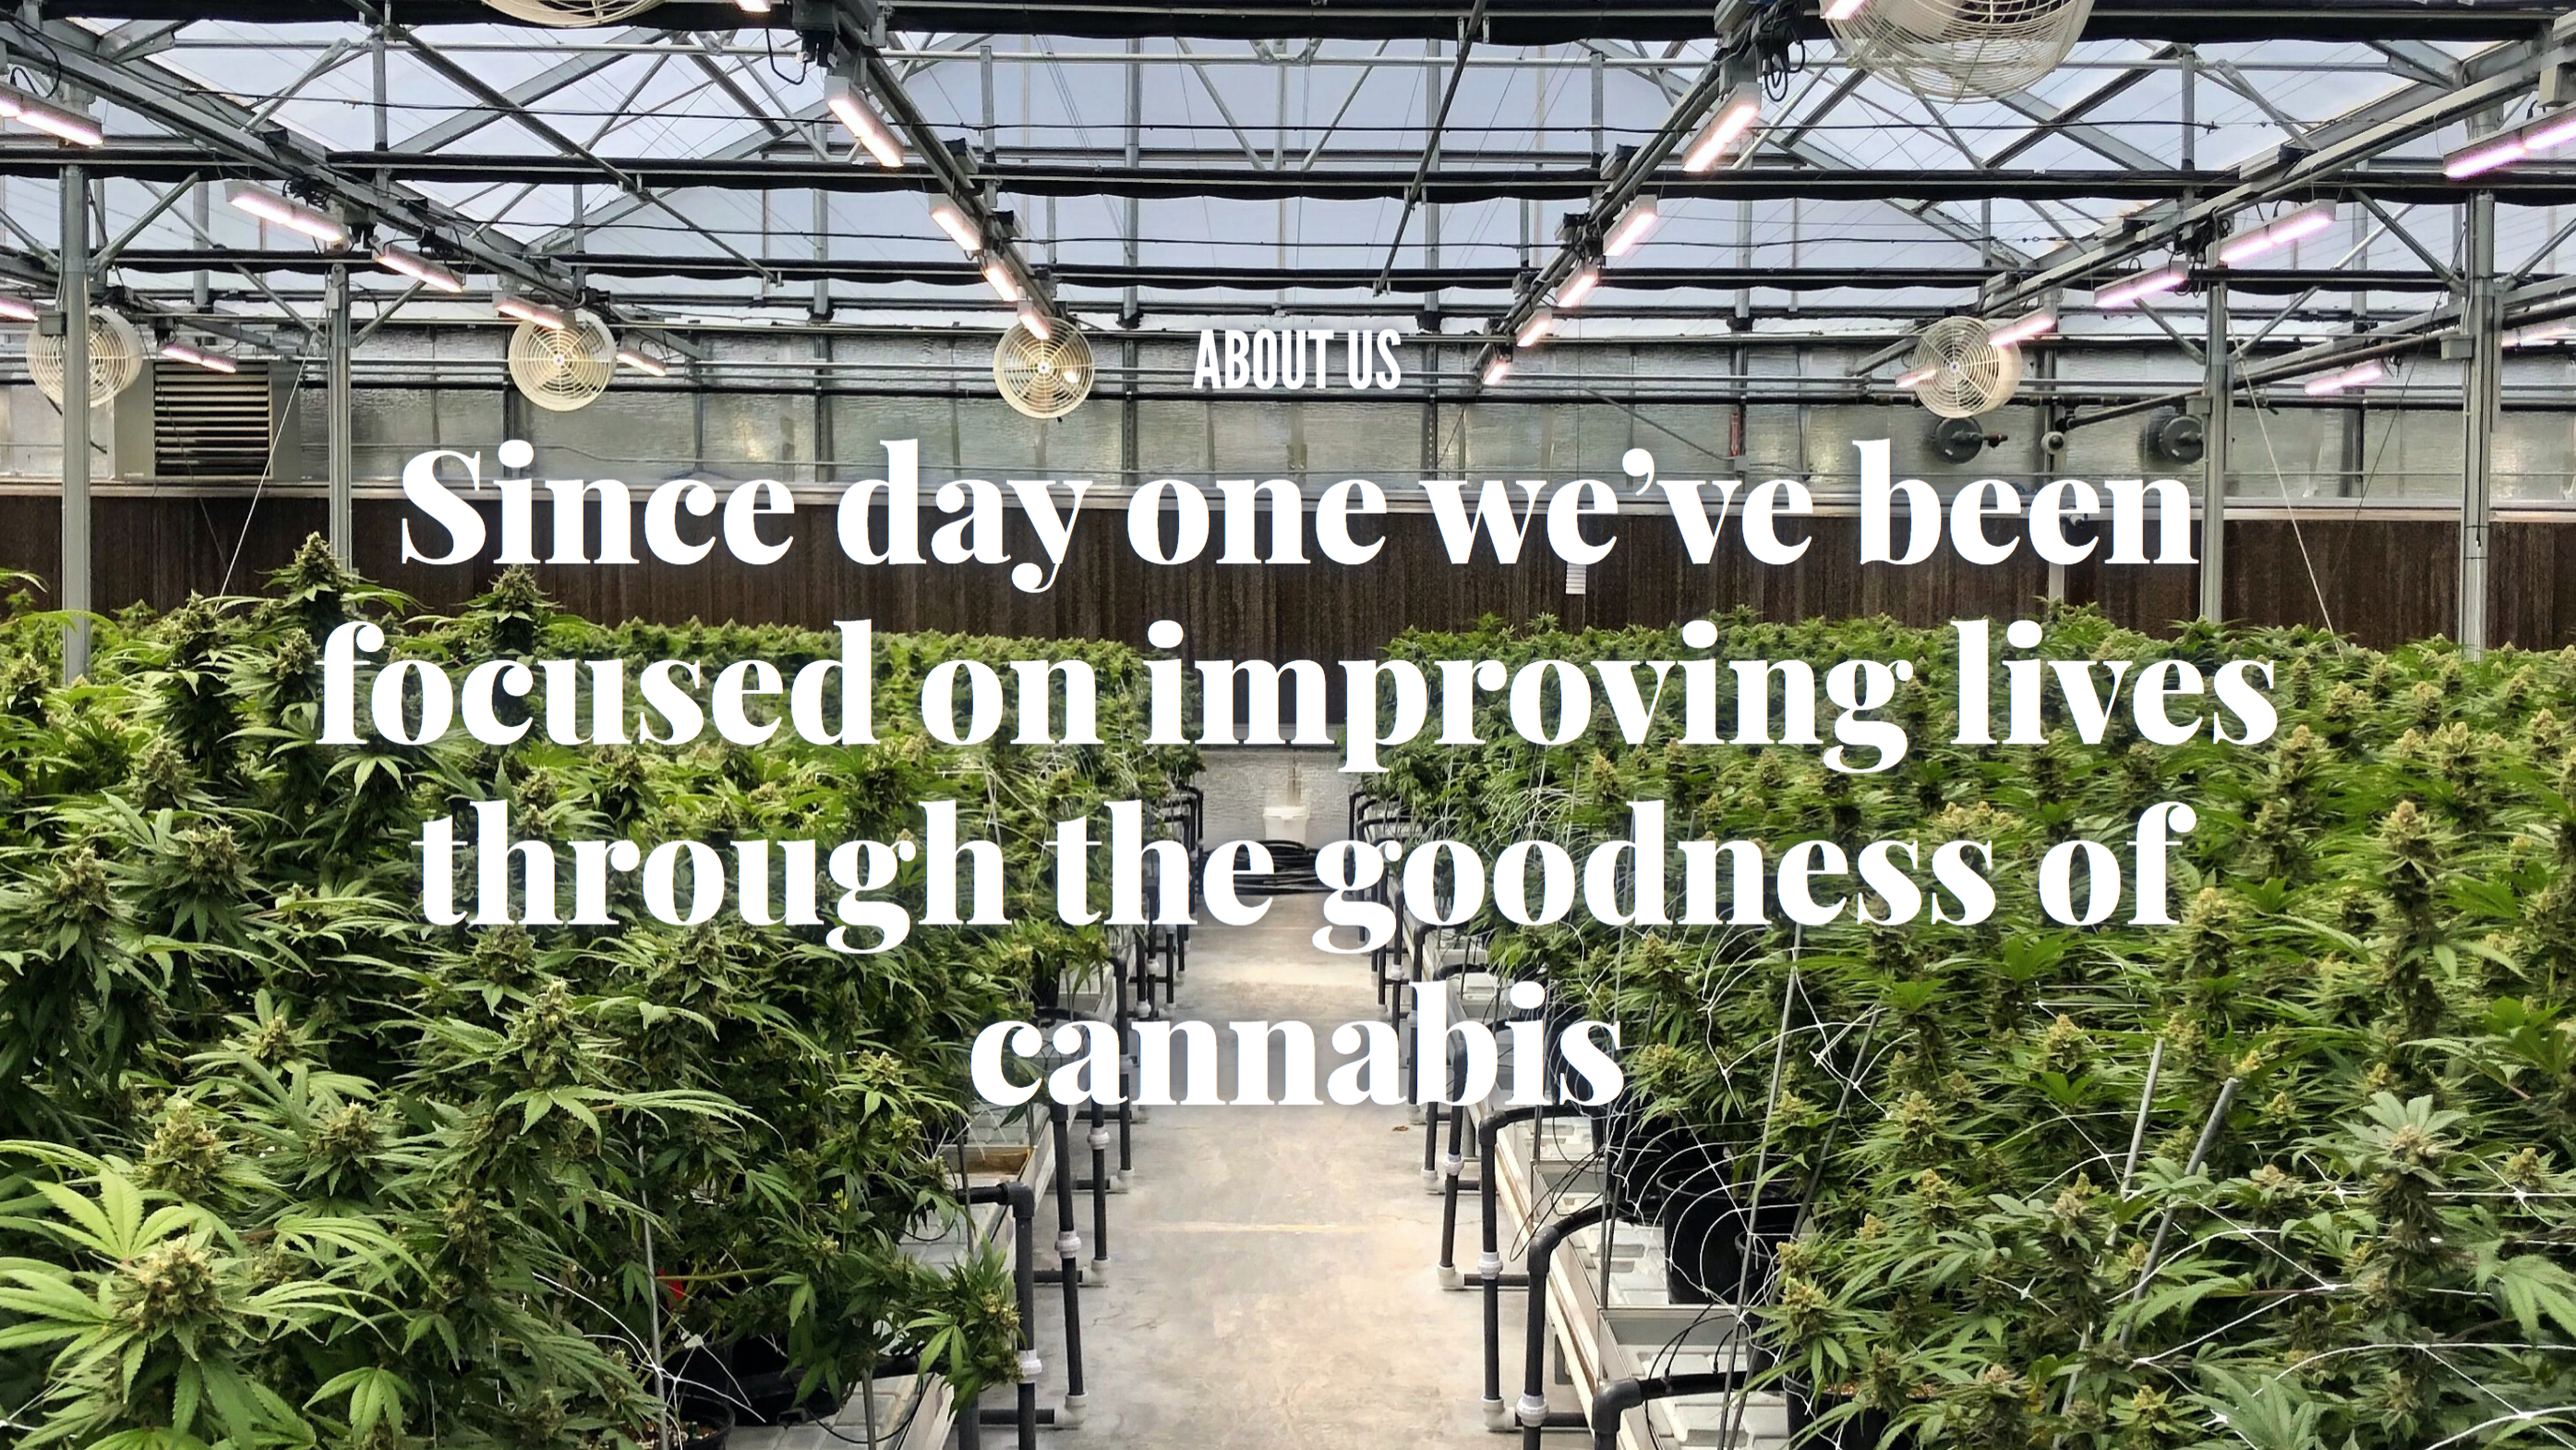 Harvest: Since day one we’ve been focused on improving lives through the goodness of cannabis